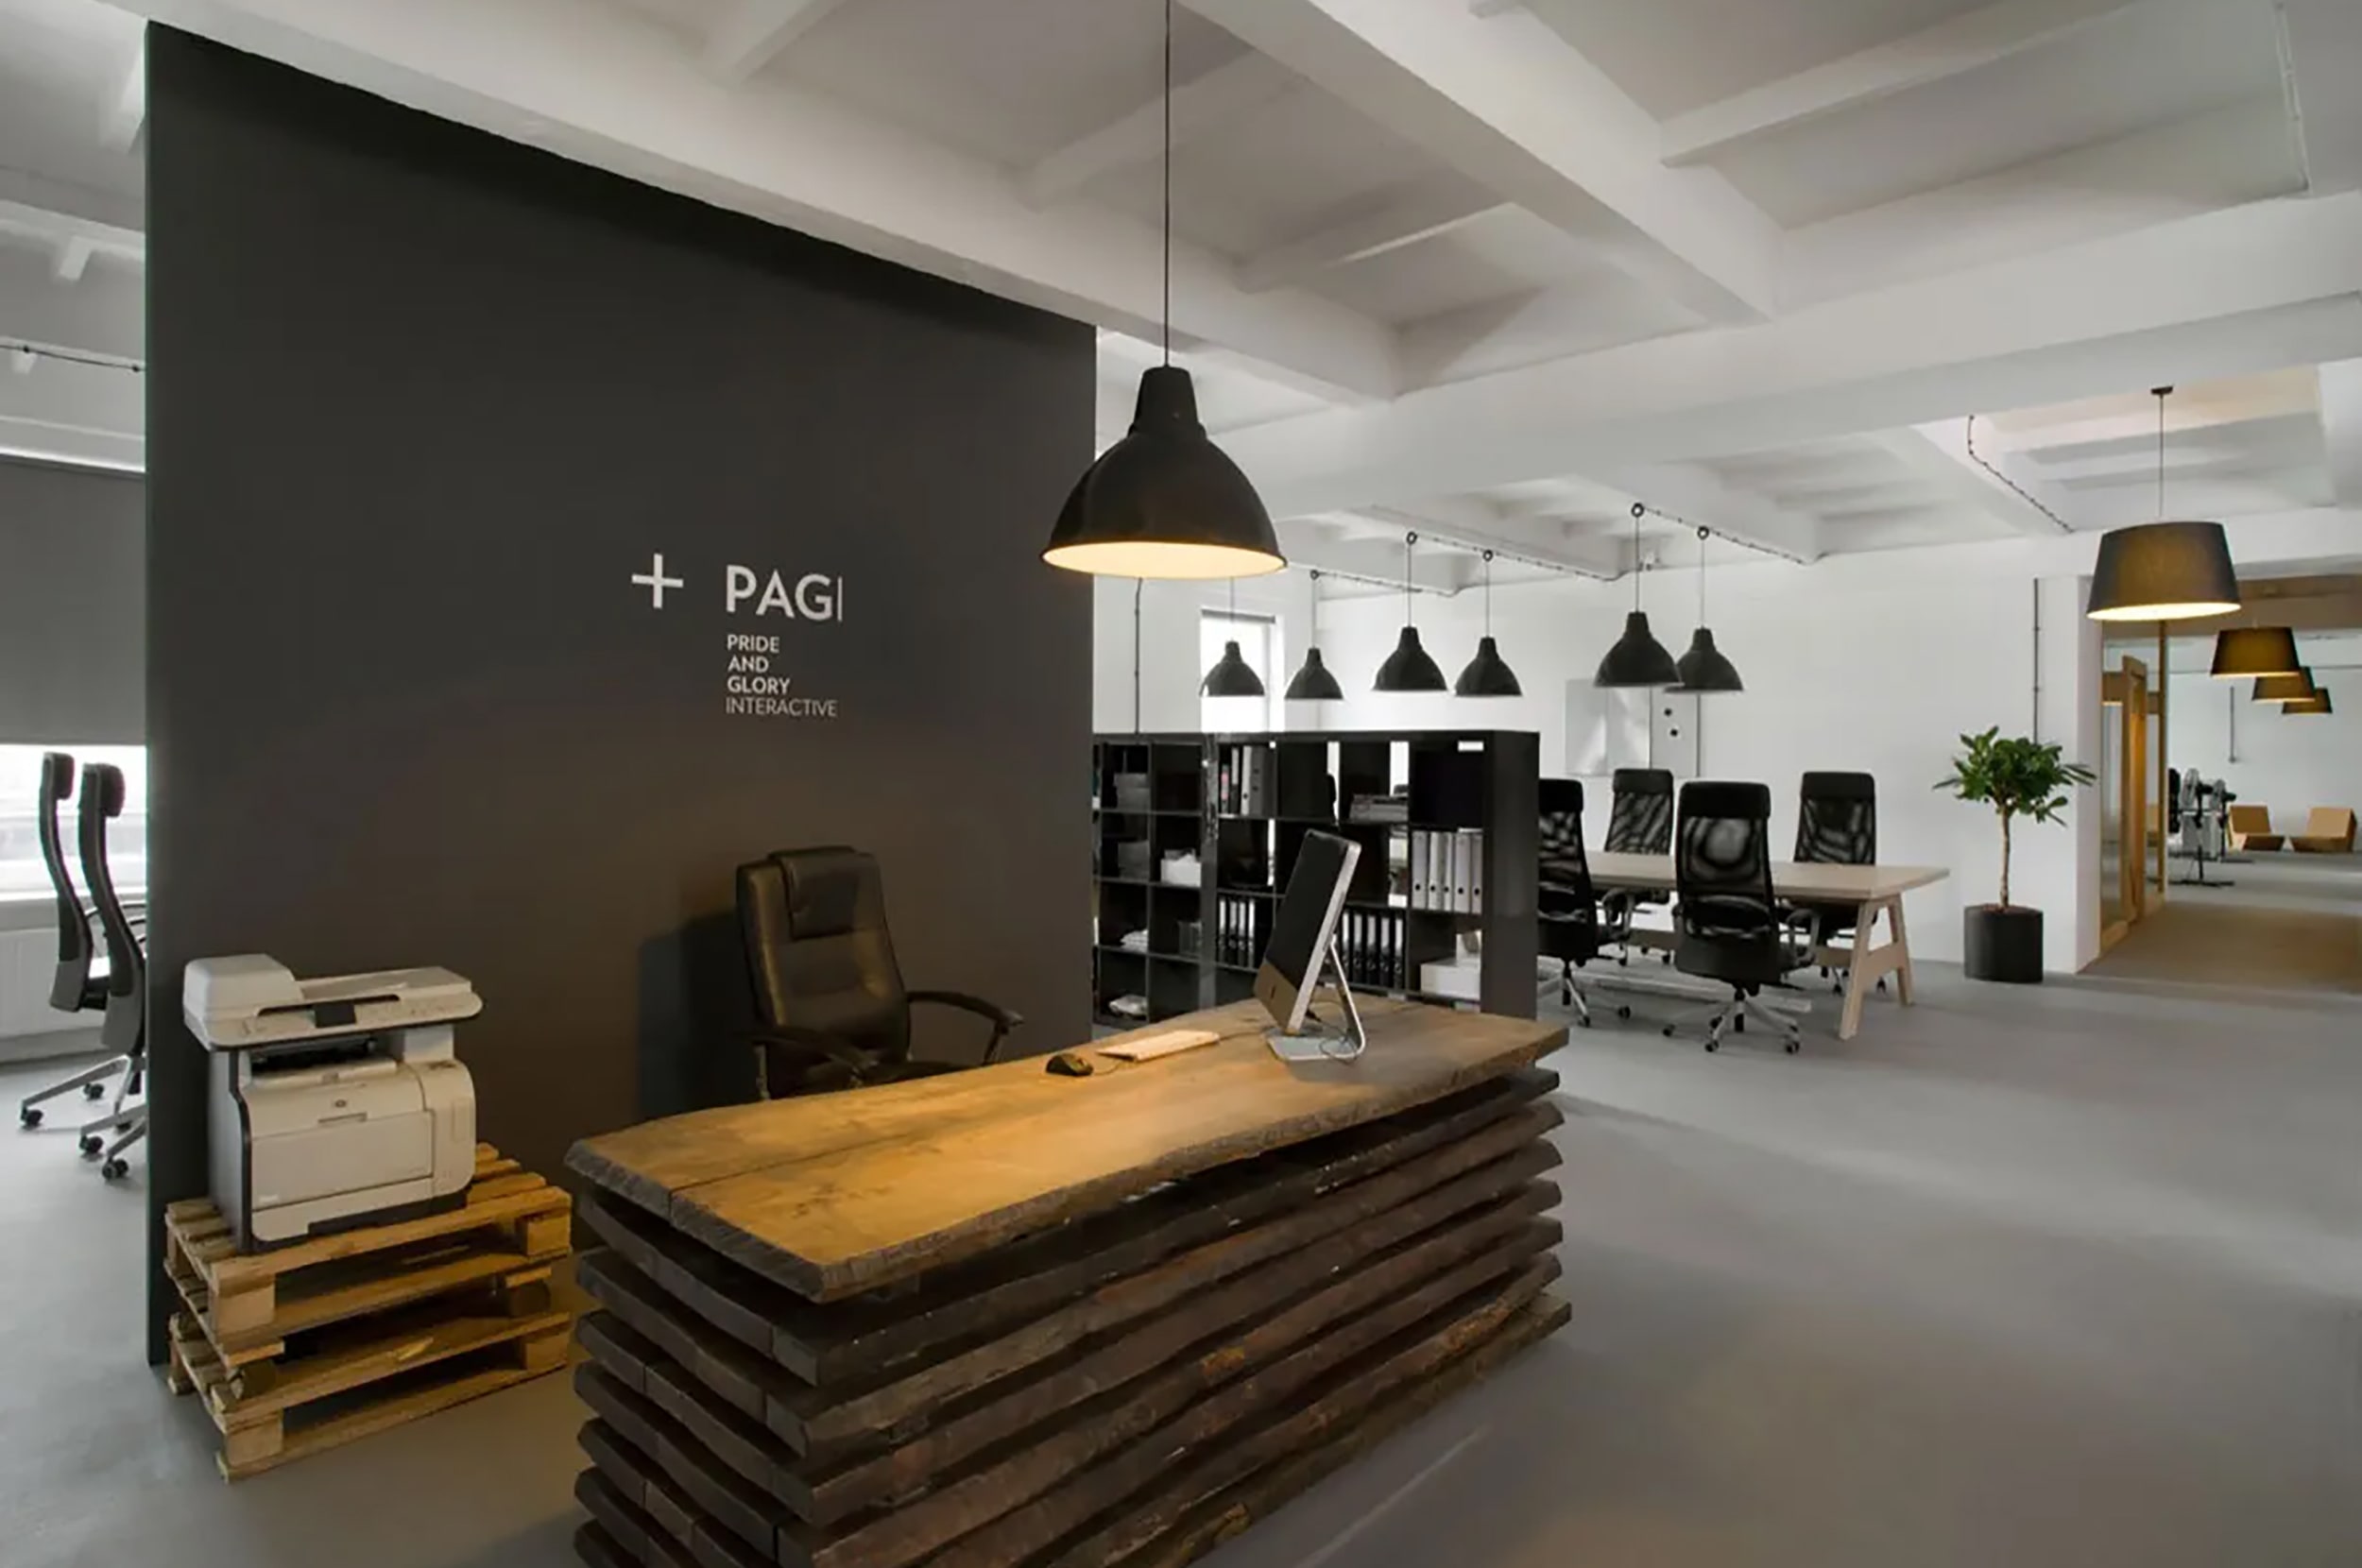 Amazing Interiors: Office, residential and commercial designer